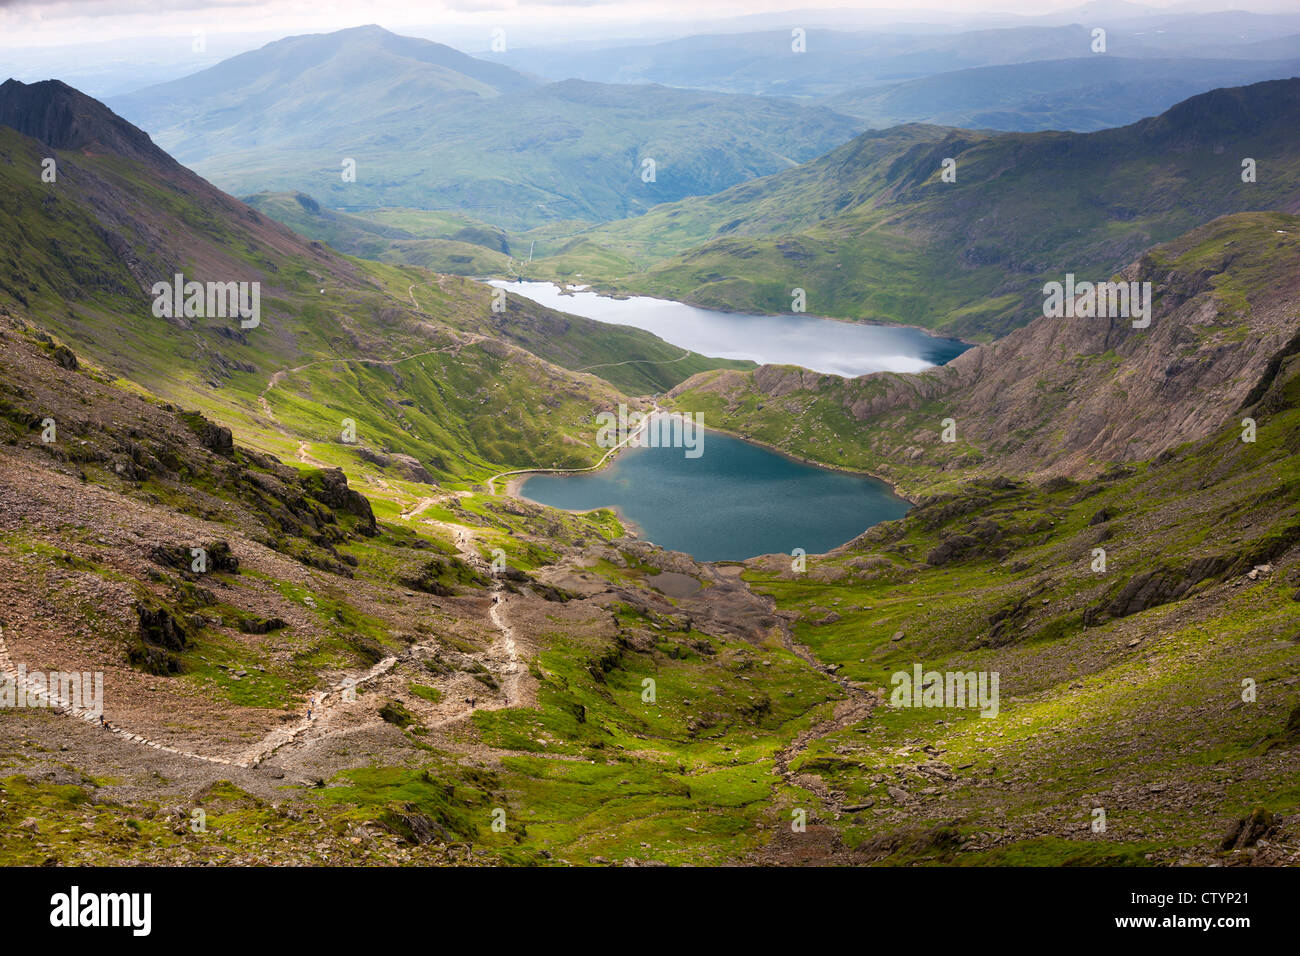 View from Pyg Track over Glaslyn and Llyn LLydaw, Snowdonia National Park, Wales Stock Photo